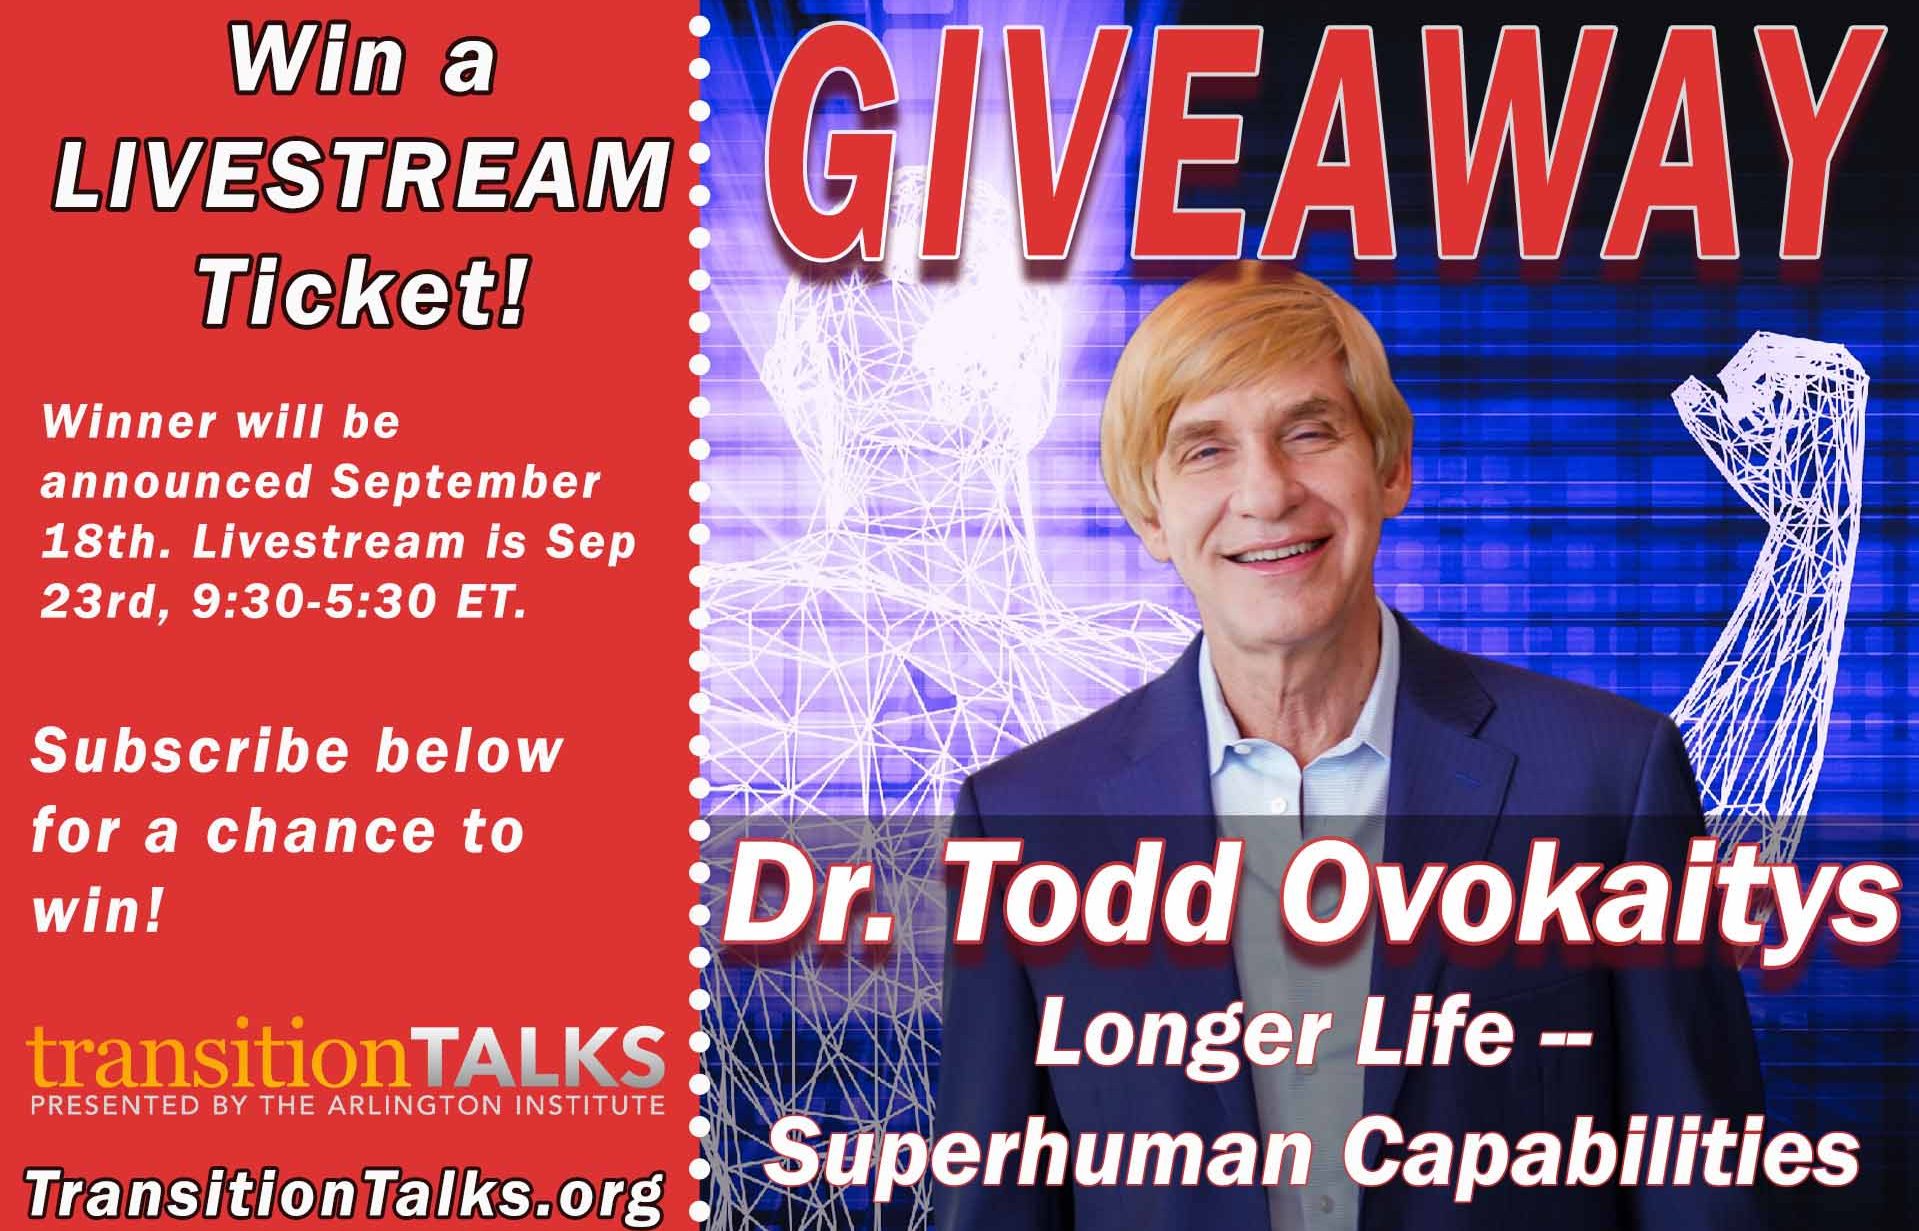 Win a livestream ticket to Dr. Todd Ovokaitys